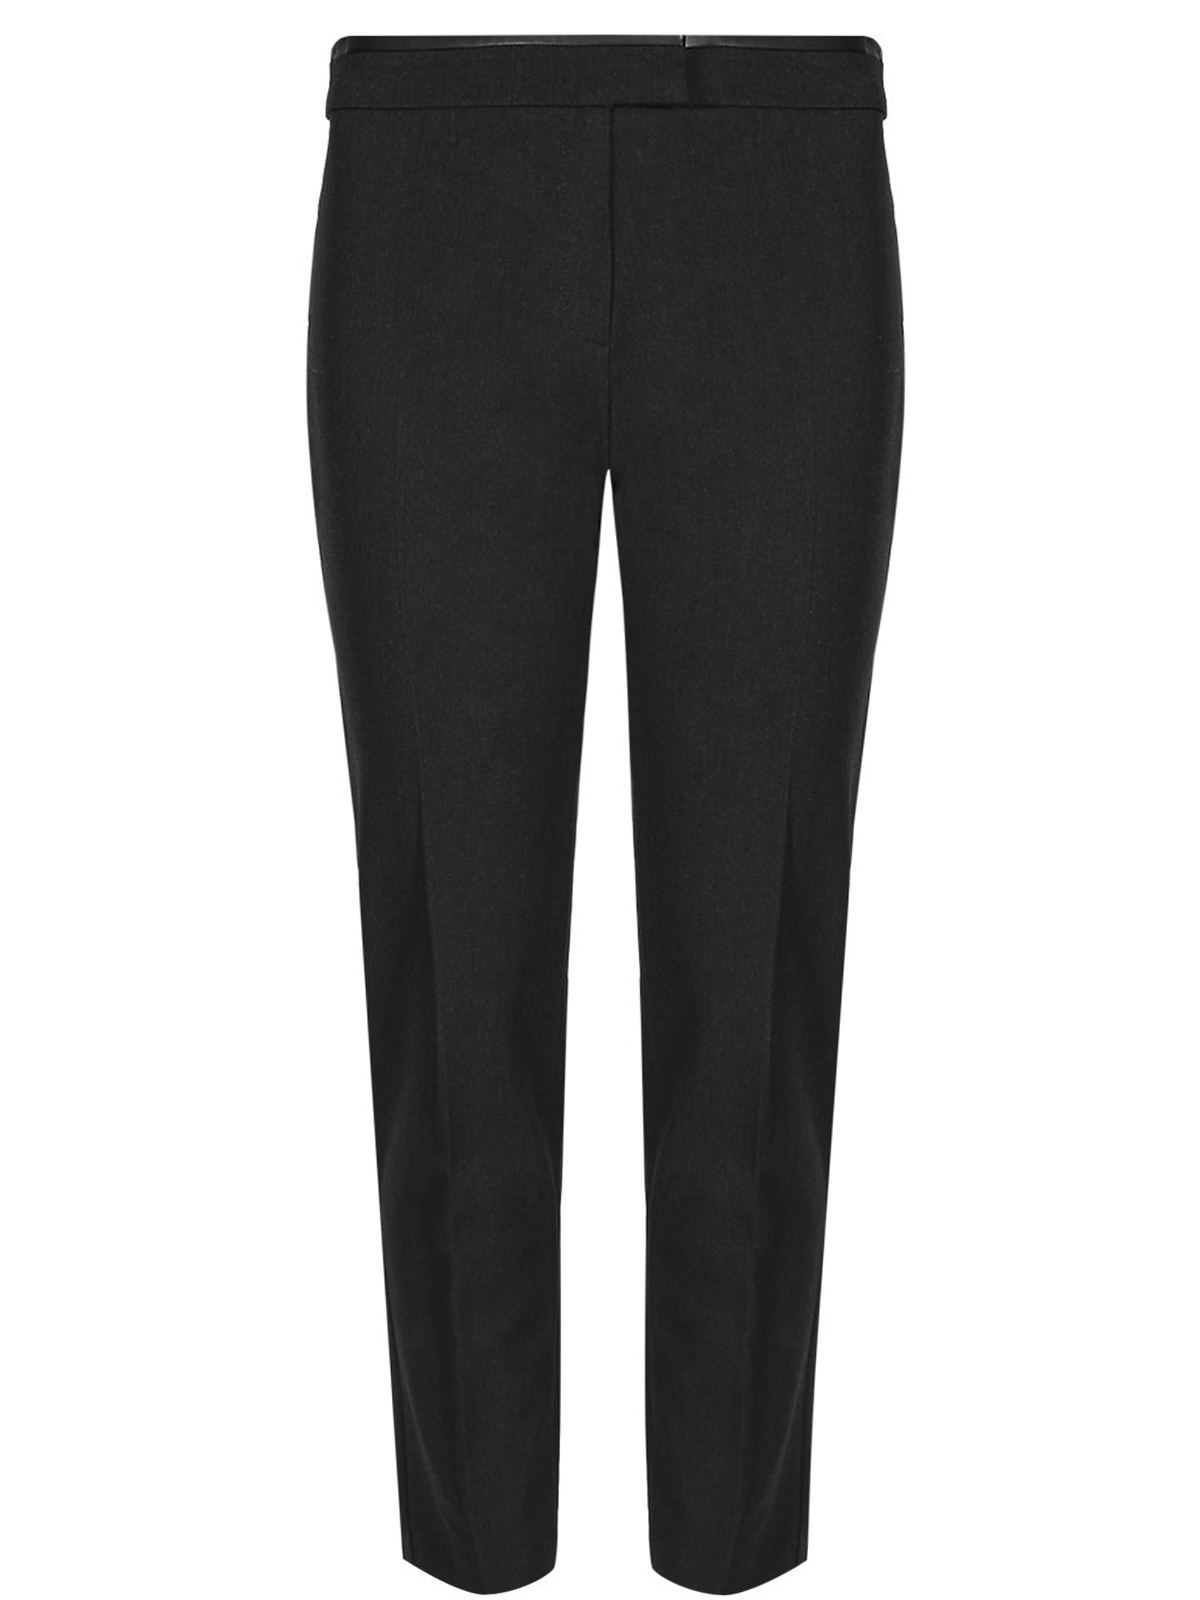 Marks and Spencer - - M&5 BLACK Straight Leg Ankle Grazer Trousers ...